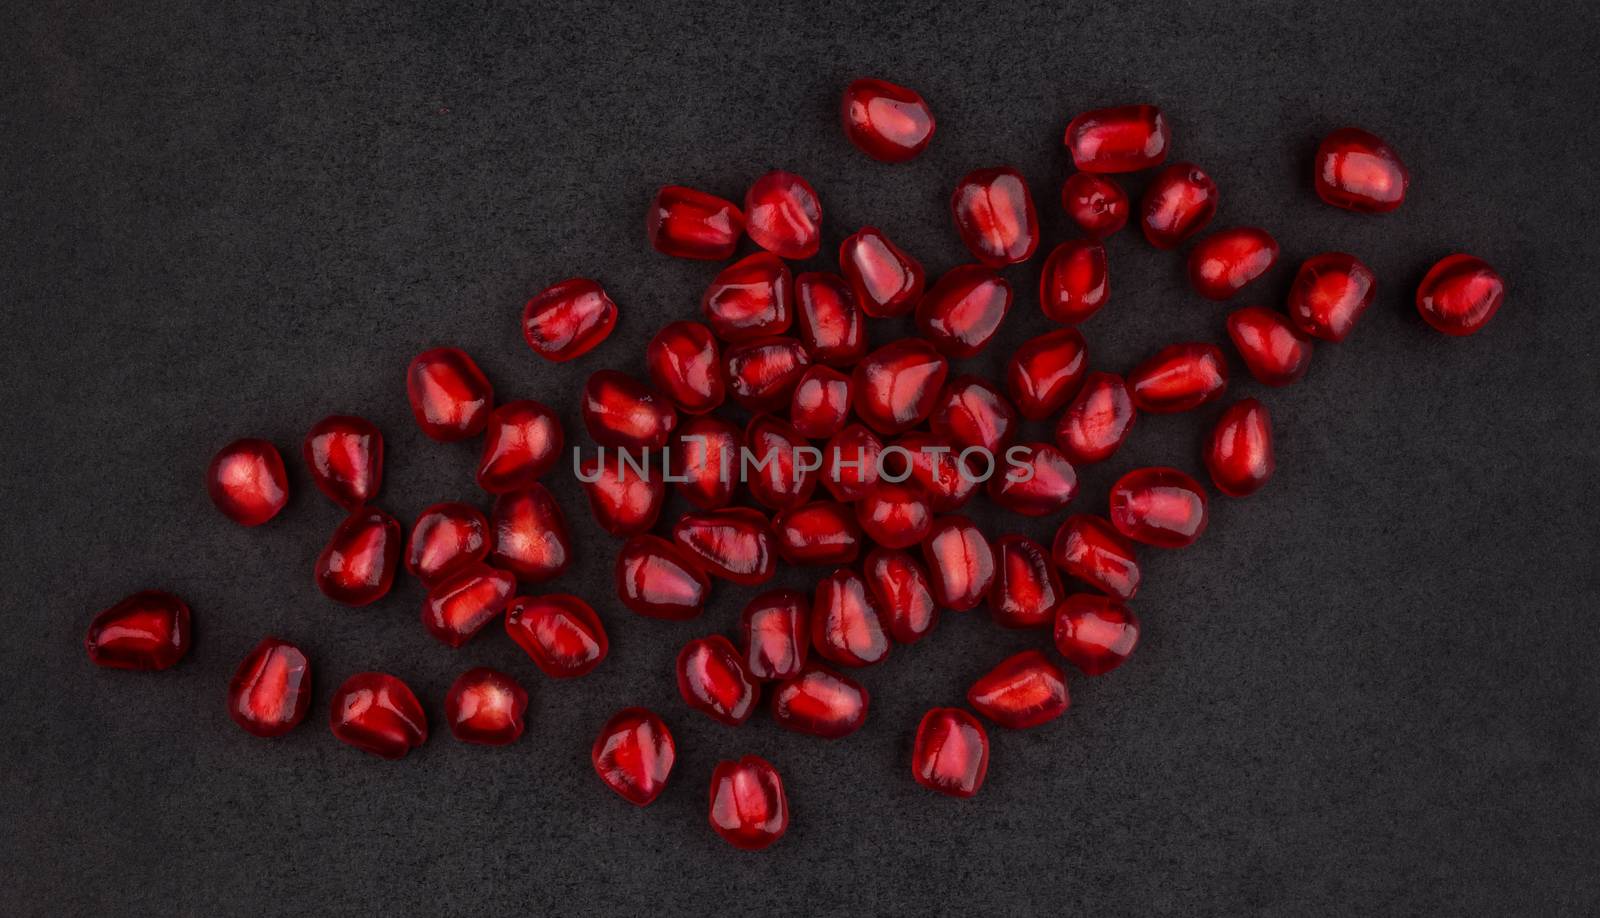 Pomegranate seeds on black background, with empty space for text by xamtiw